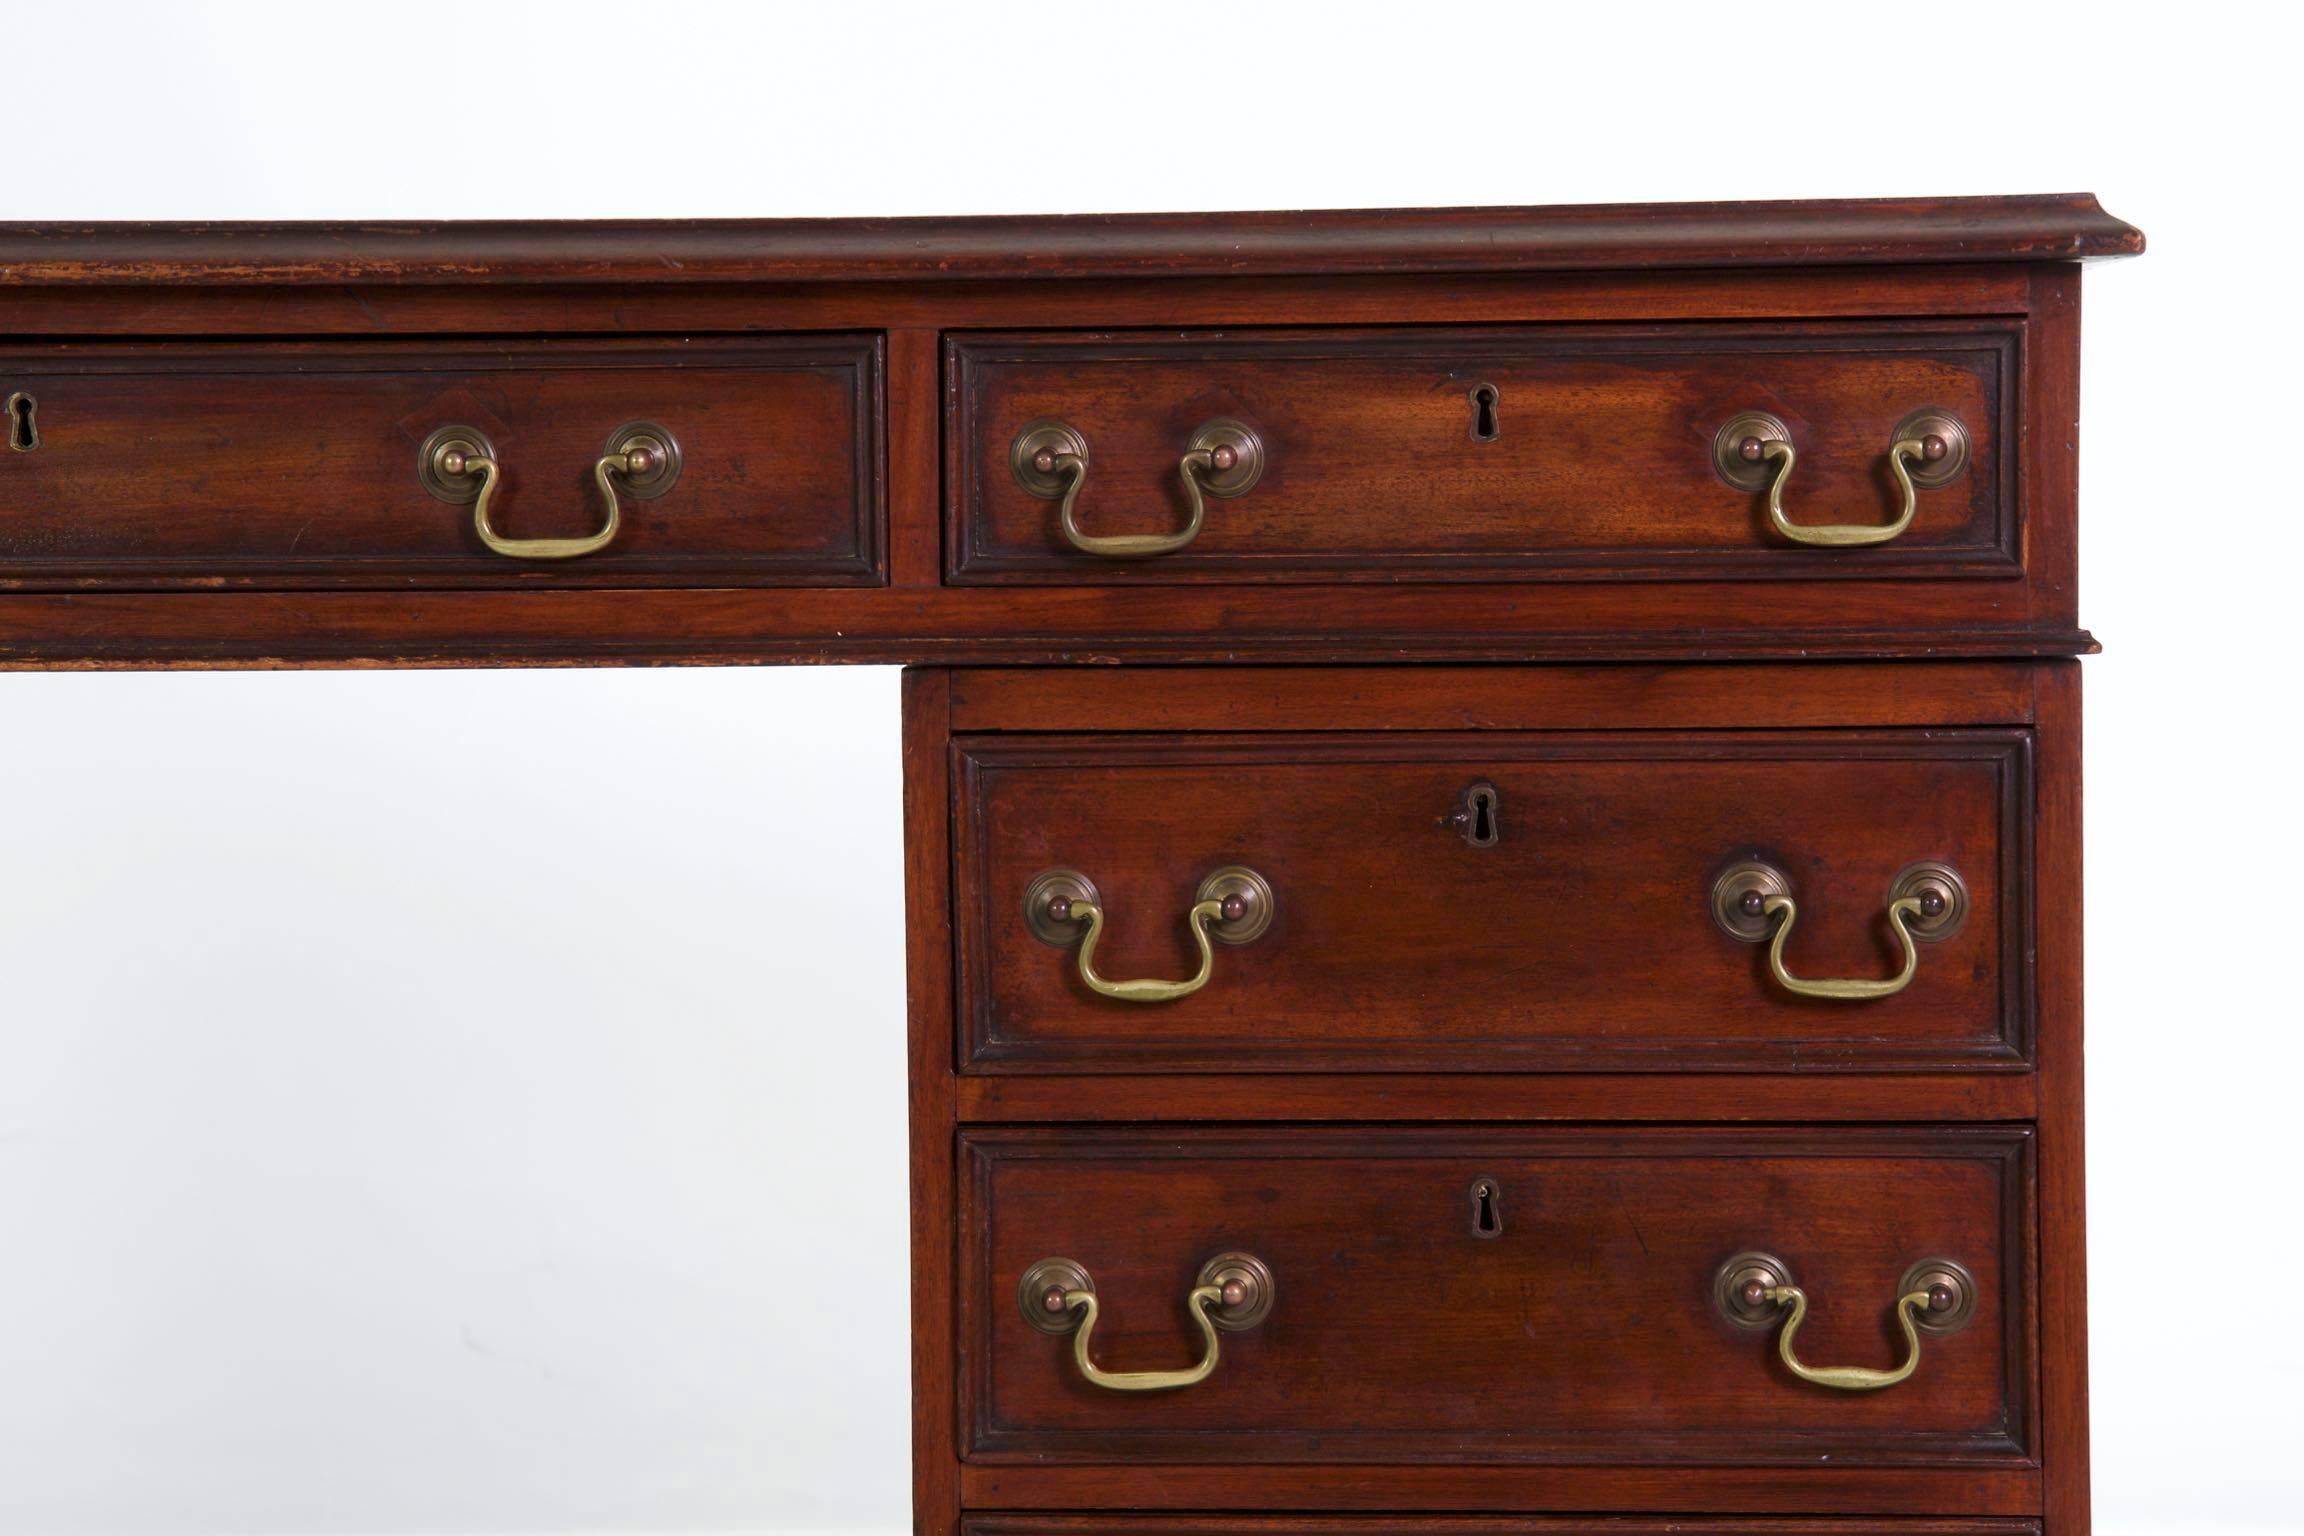 20th Century English George III Style Mahogany and Leather Antique Pedestal Desk (George III.)